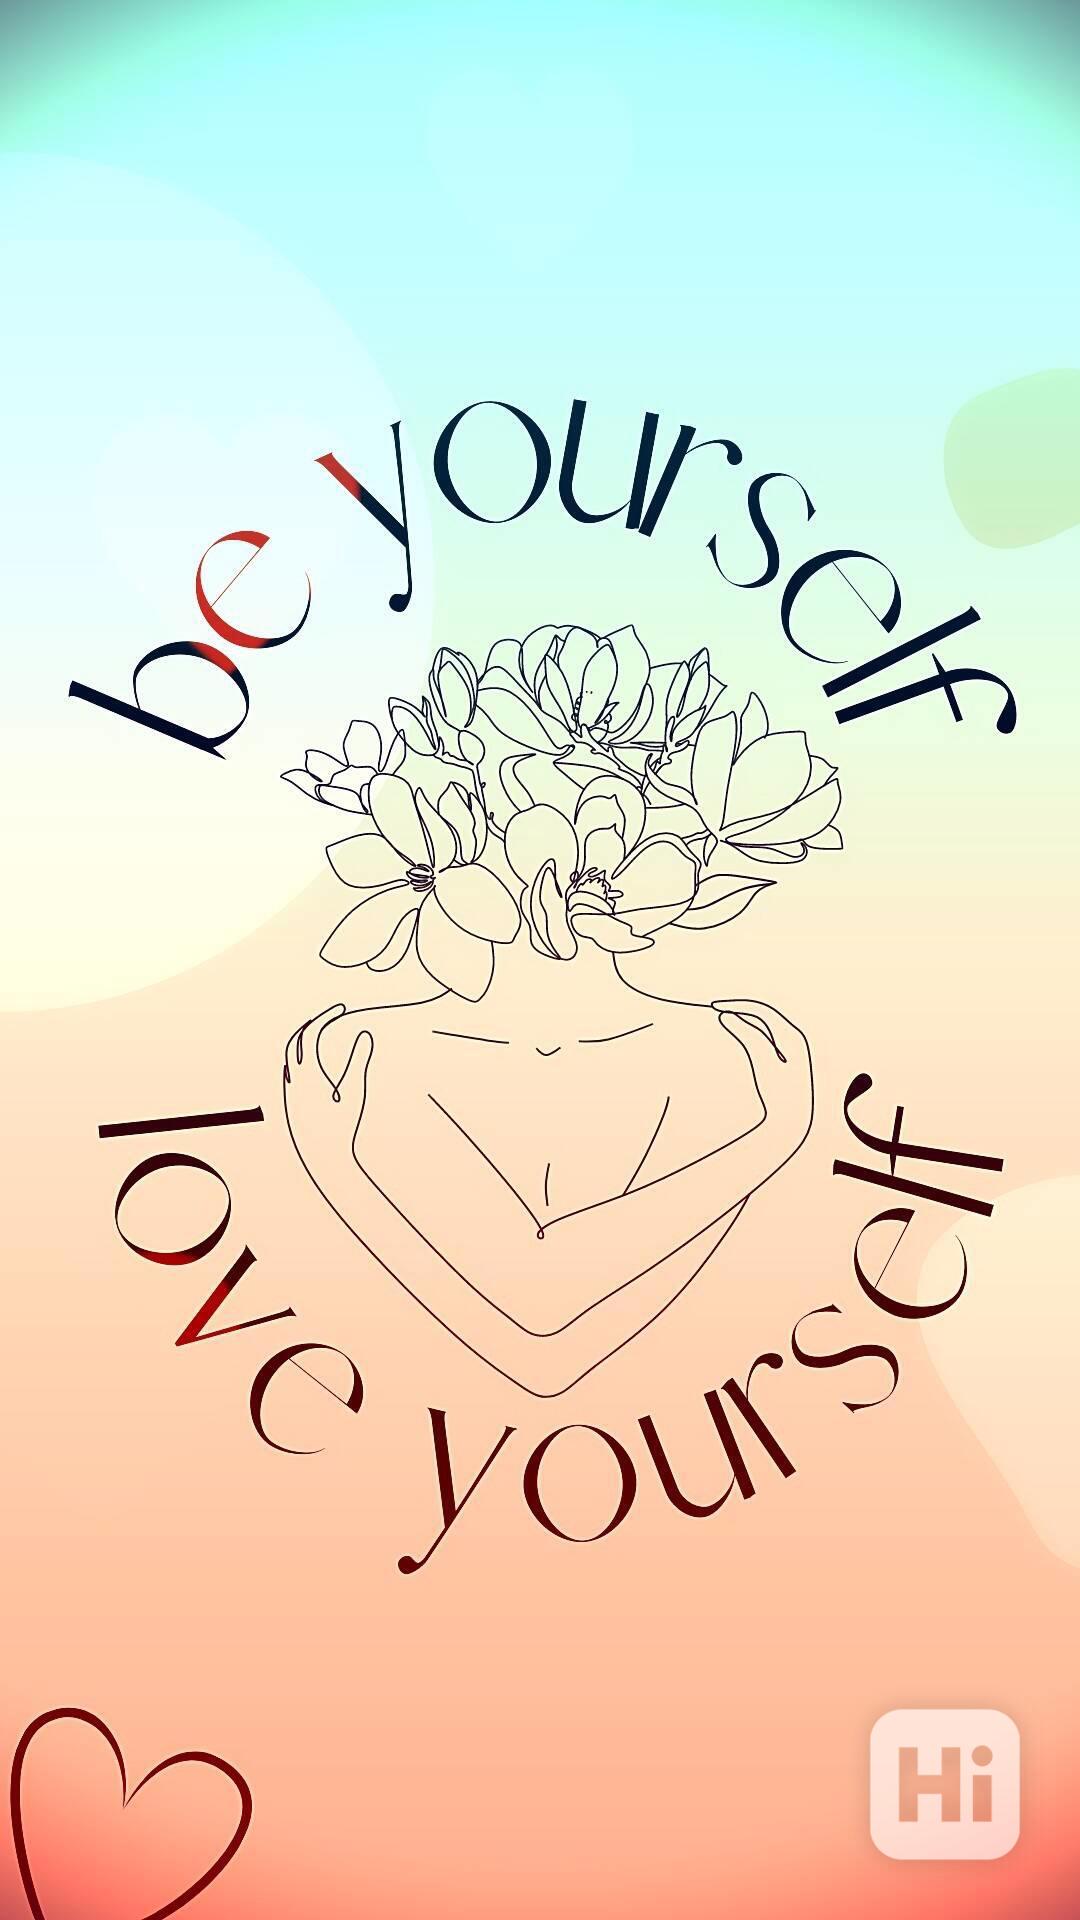 Free Online Course - Self-love, Self-acceptance, Inner Value - foto 1